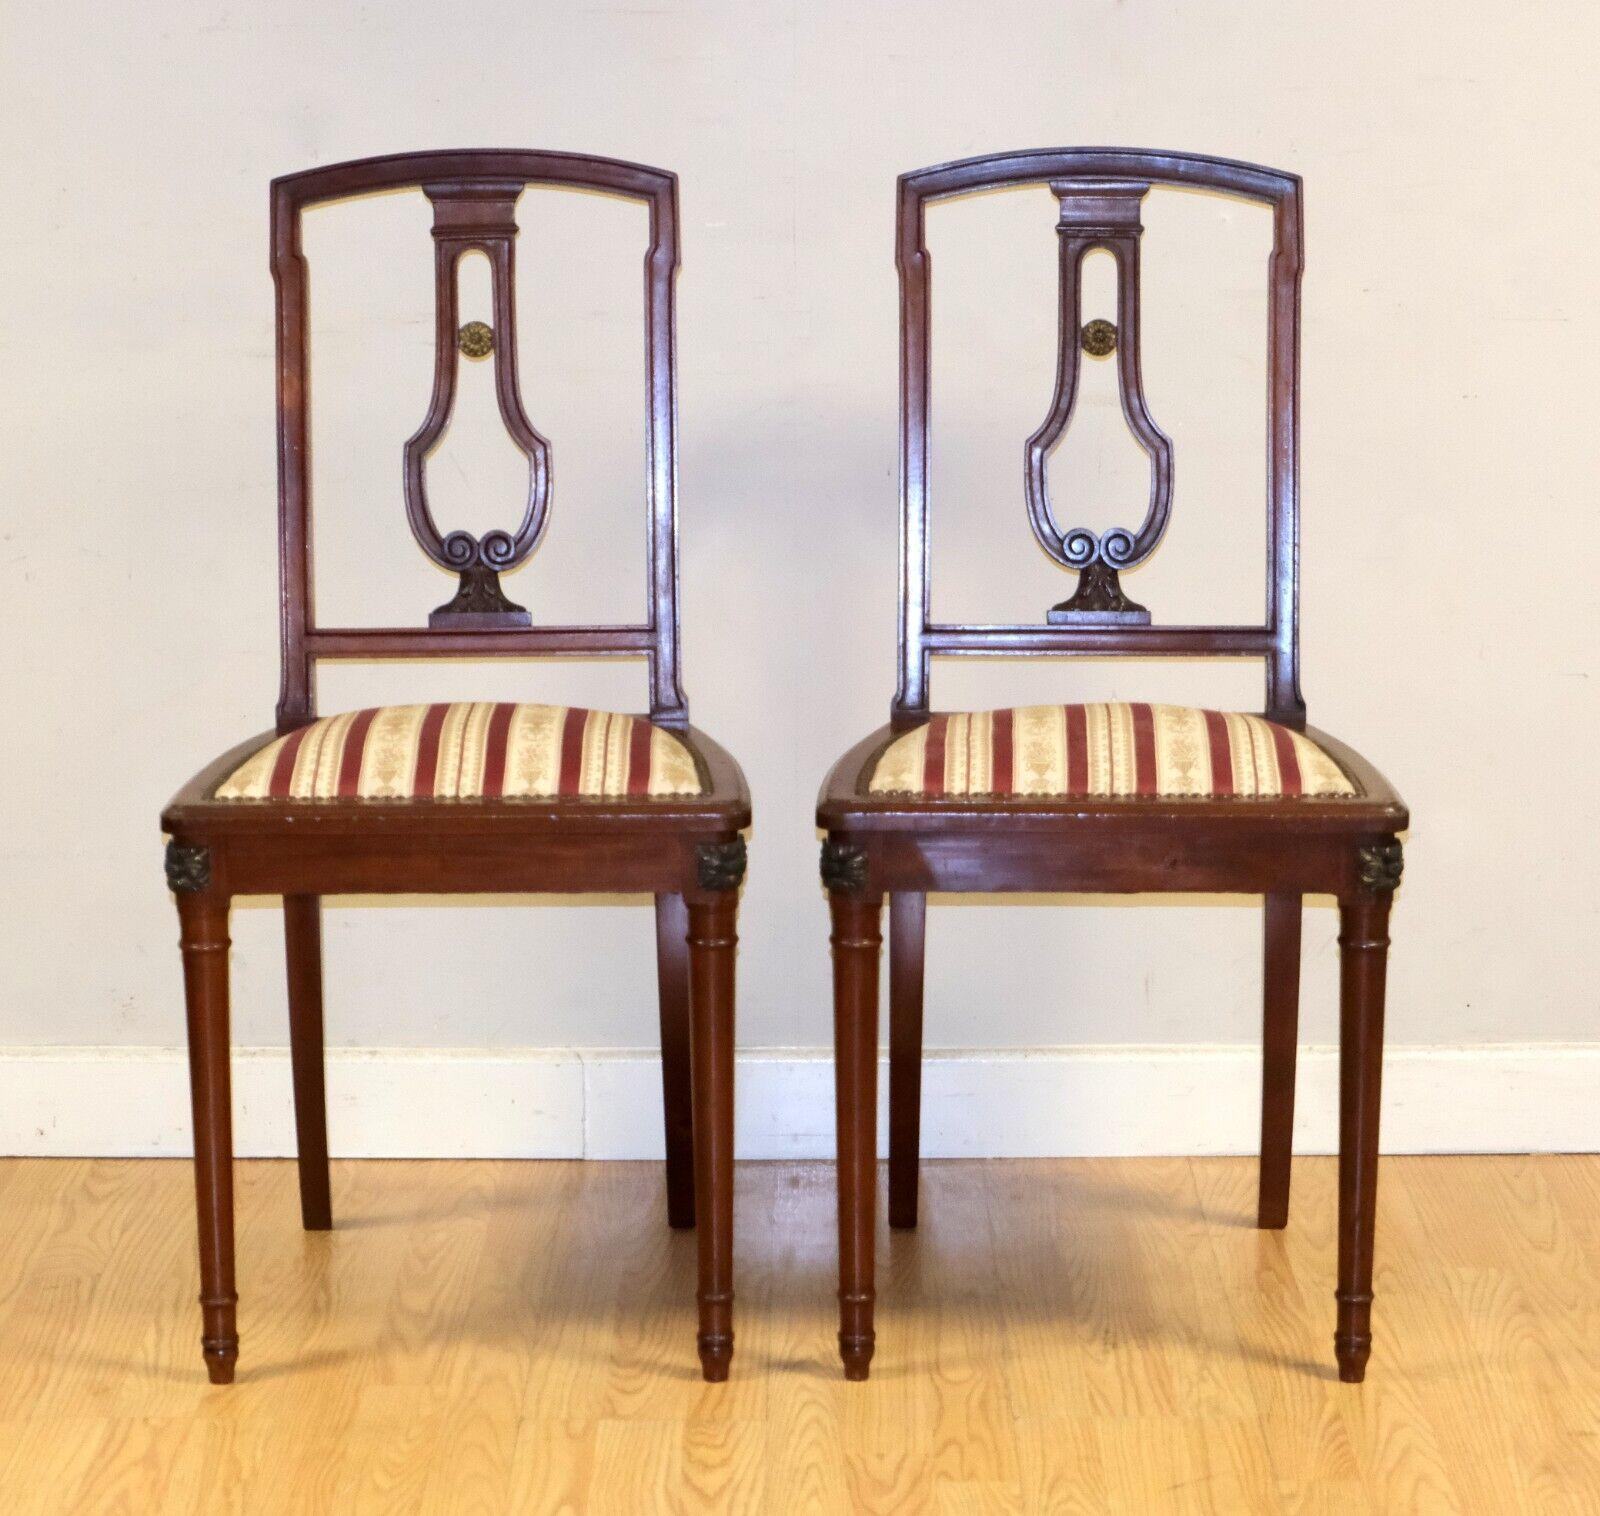 We are delighted to offer for sale this gorgeous pair of antique occasional chairs with fabric seats.

This pair of chairs are standing on tapered legs with distinguished details on the corners. The seat has a lovely red and white fabric design with